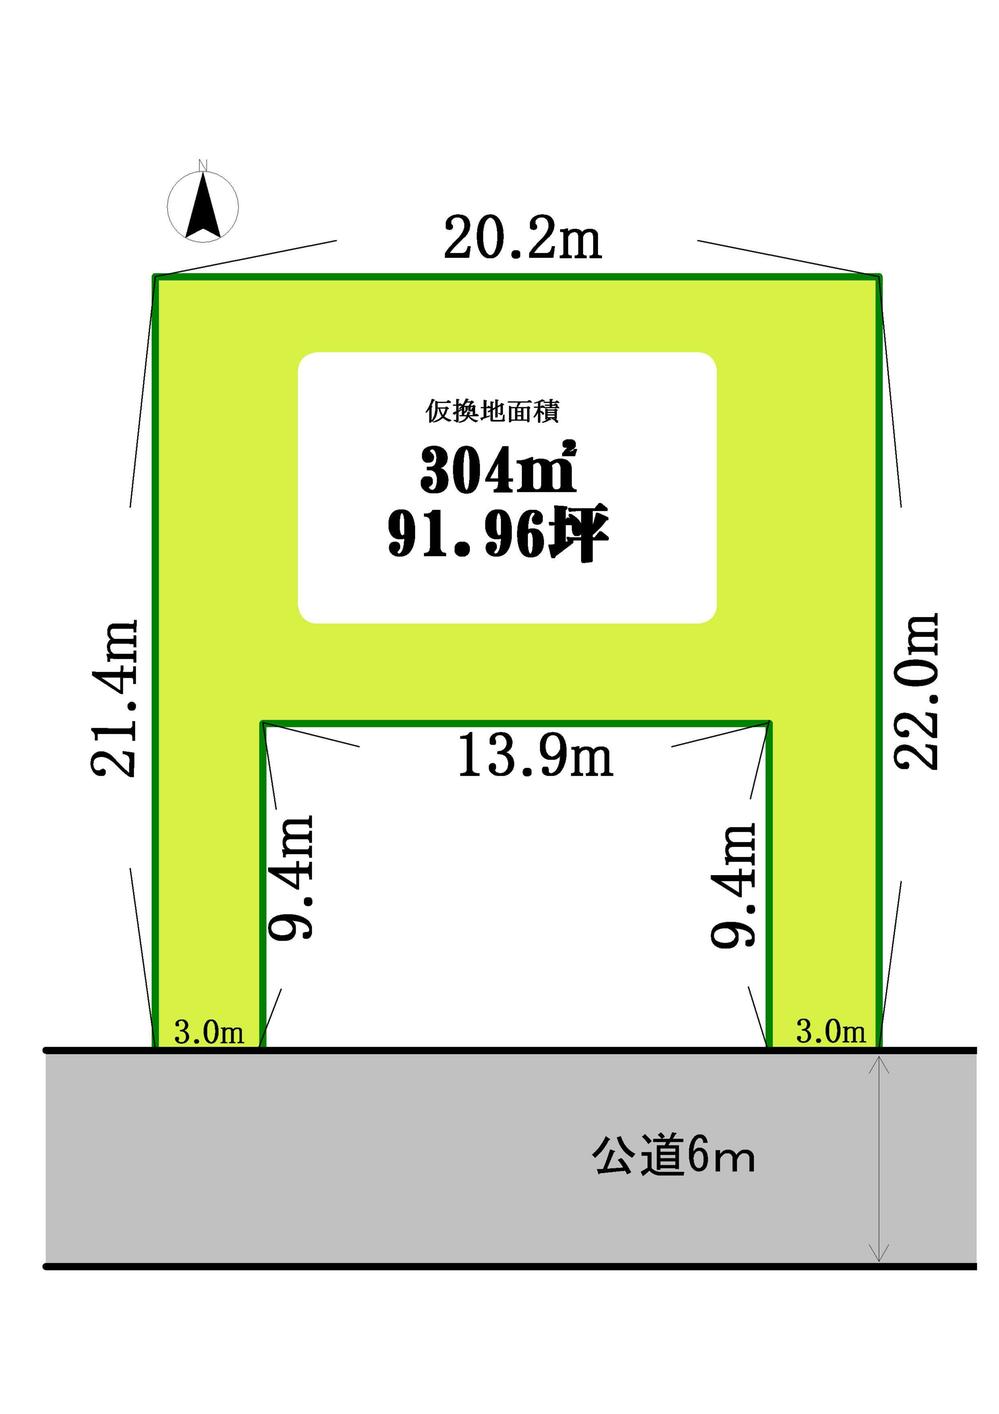 Compartment figure. Land price 41.4 million yen, What order architecture How about in the land area 304 sq m present situation vacant lot your favorite manufacturer. 